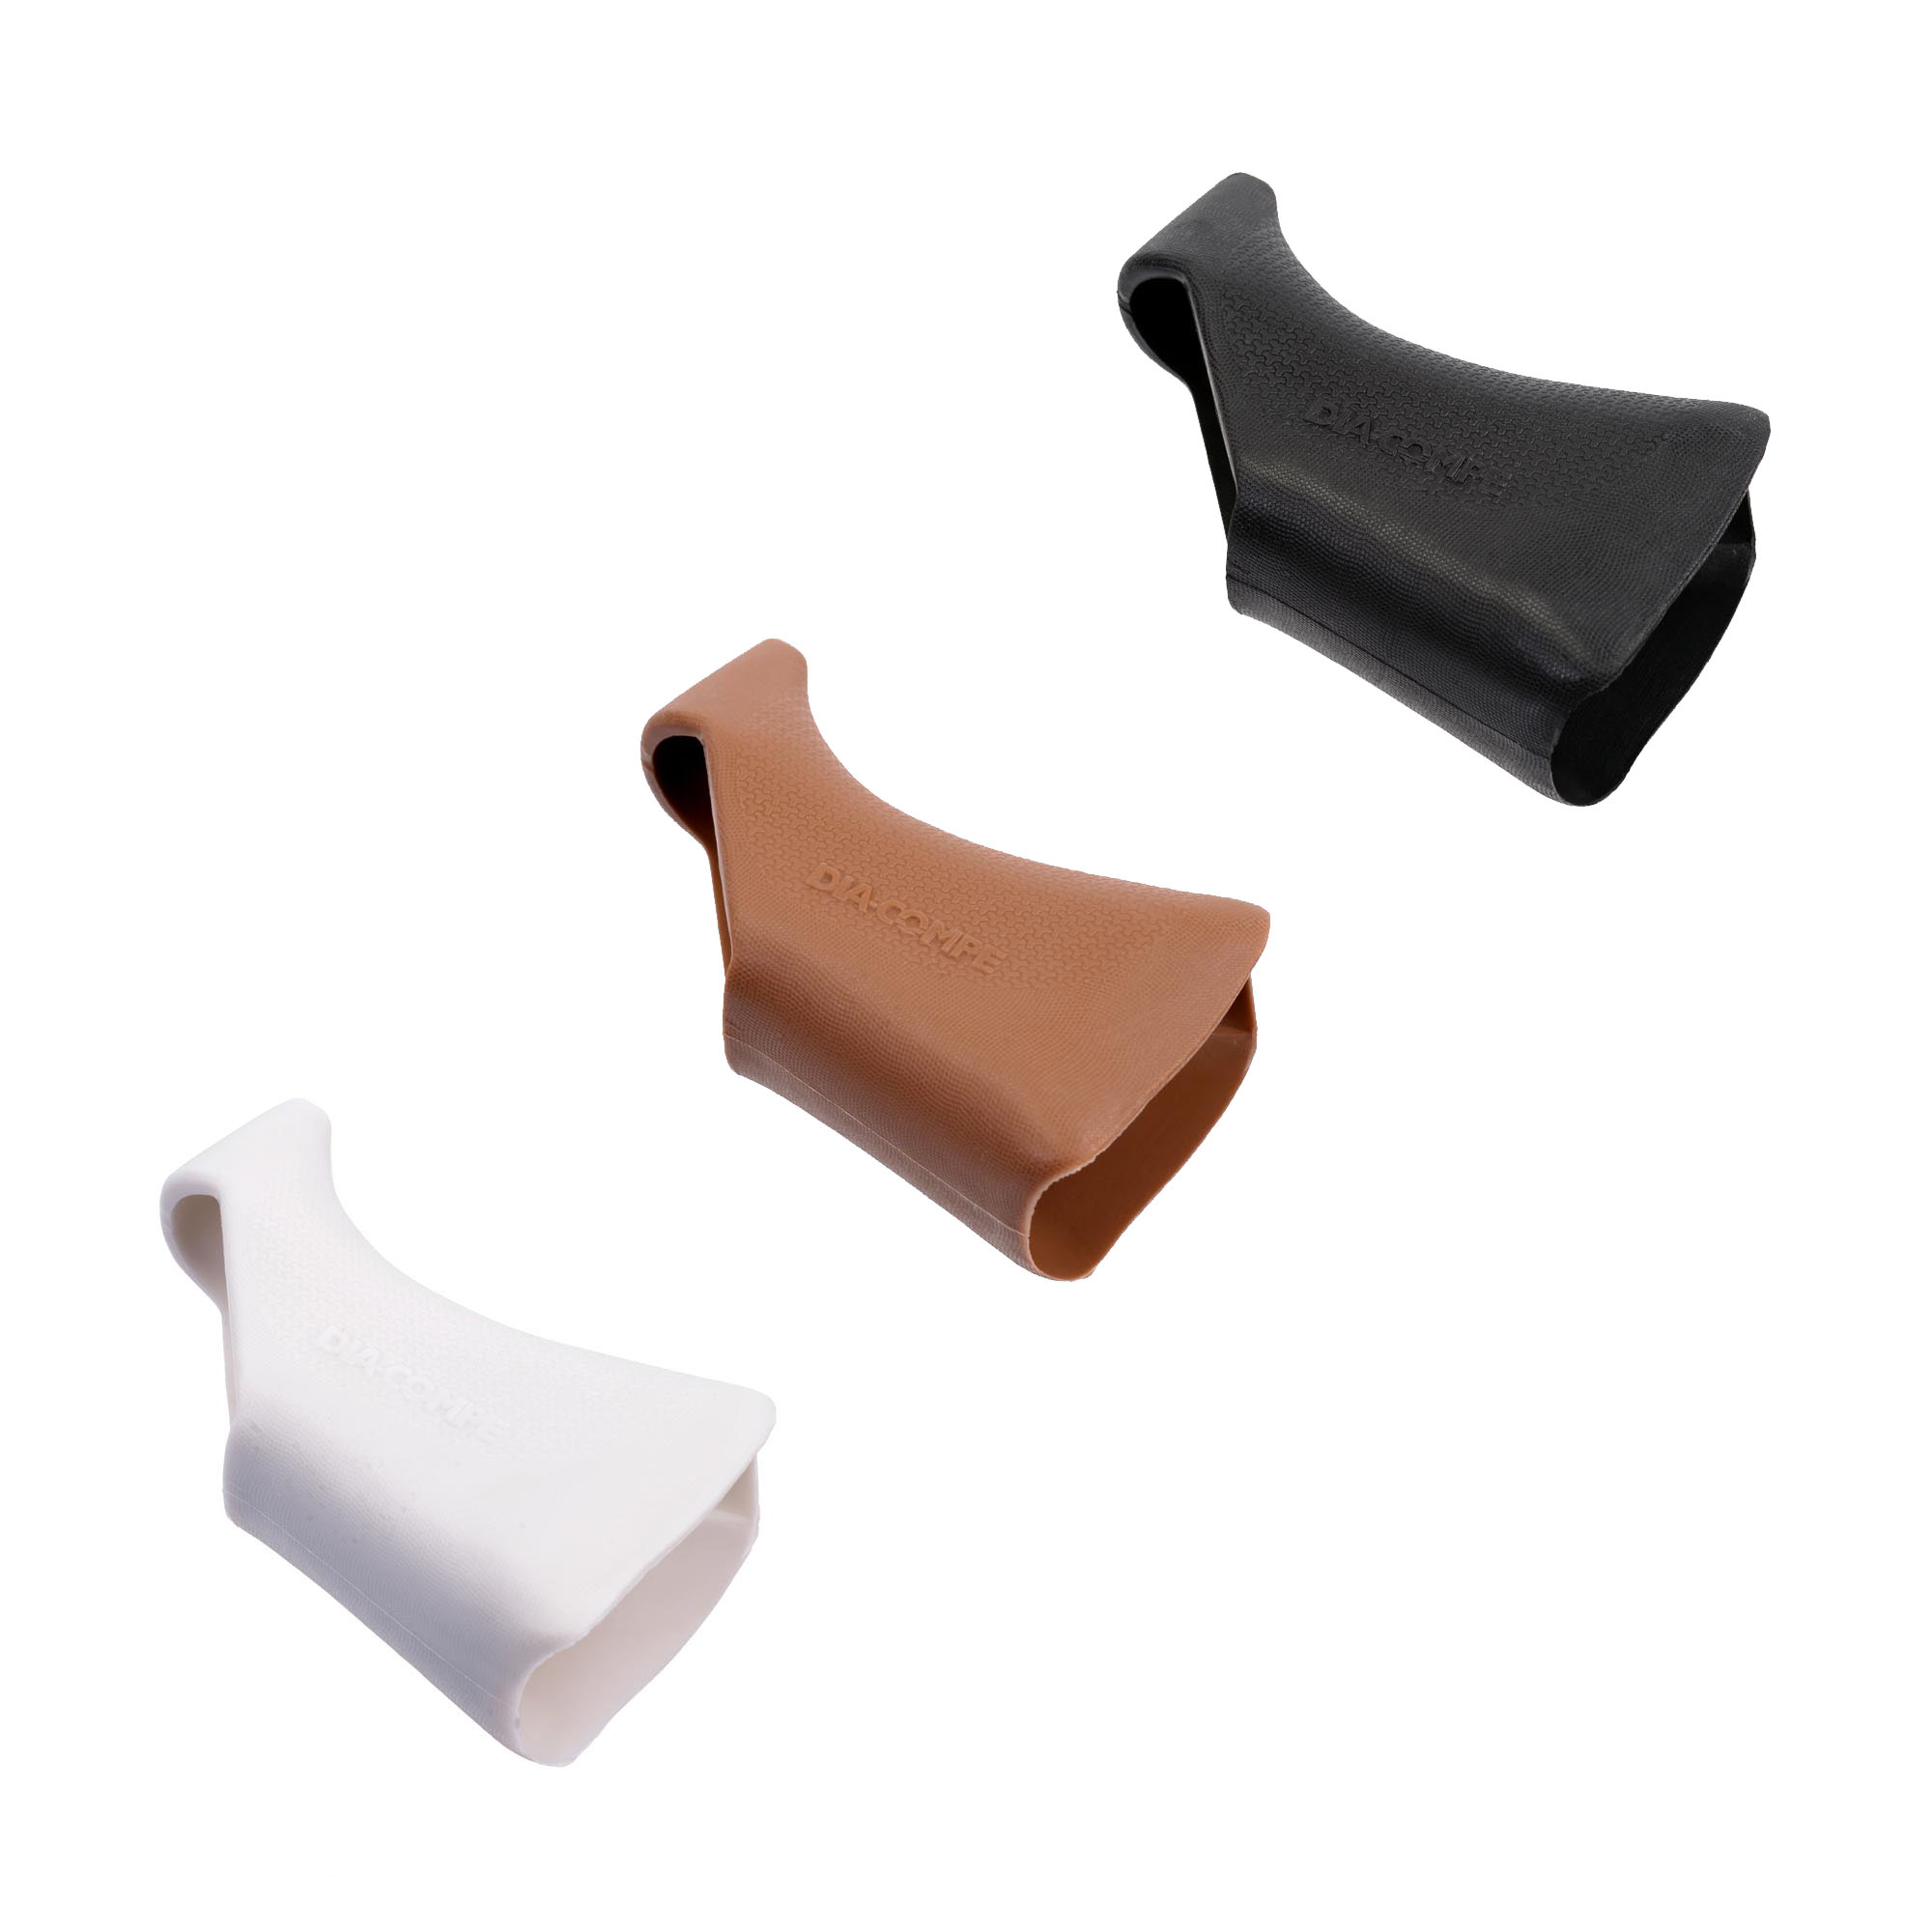 Dia-Compe Brake Lever Hoods for BL-07 and GC-07H Drop Levers